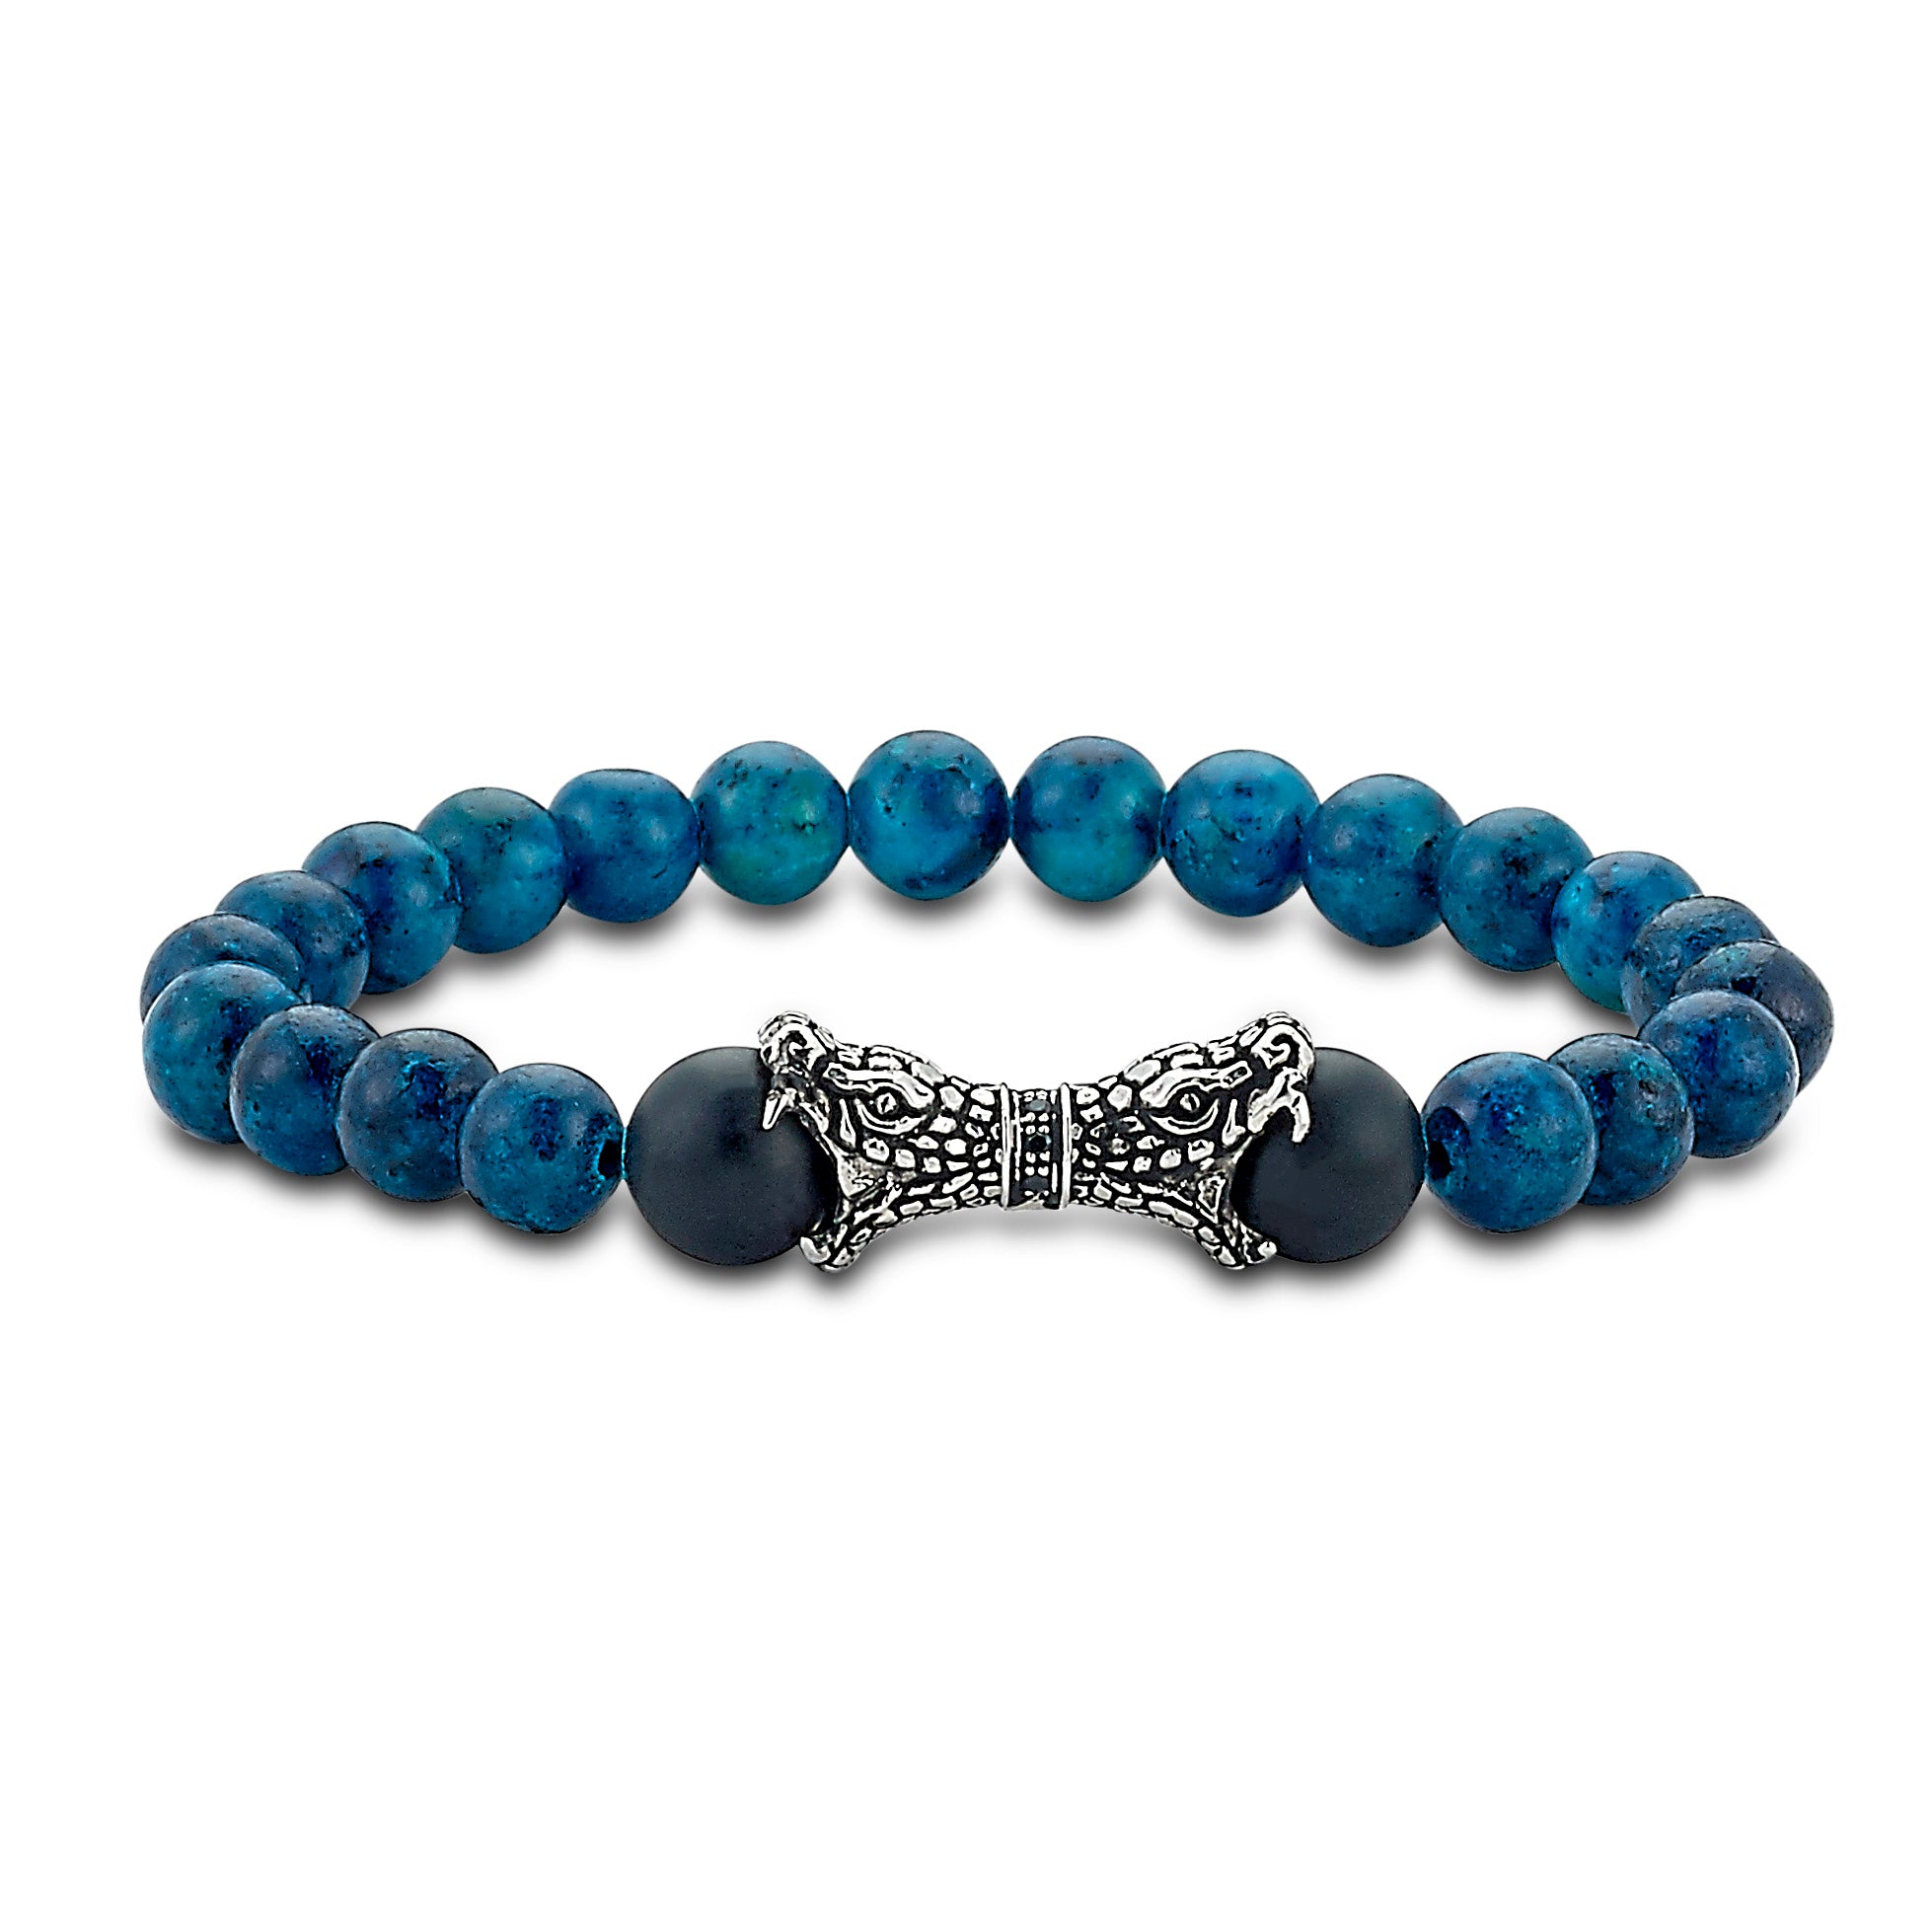 Tarakan Chrysocolla Bracelet available at Talisman Collection Fine Jewelers in El Dorado Hills, CA and online. Specs: Tarakan Bracelet features Sterling Silver dragons and chrysocolla beads. Bracelet measures 10mm wide. 